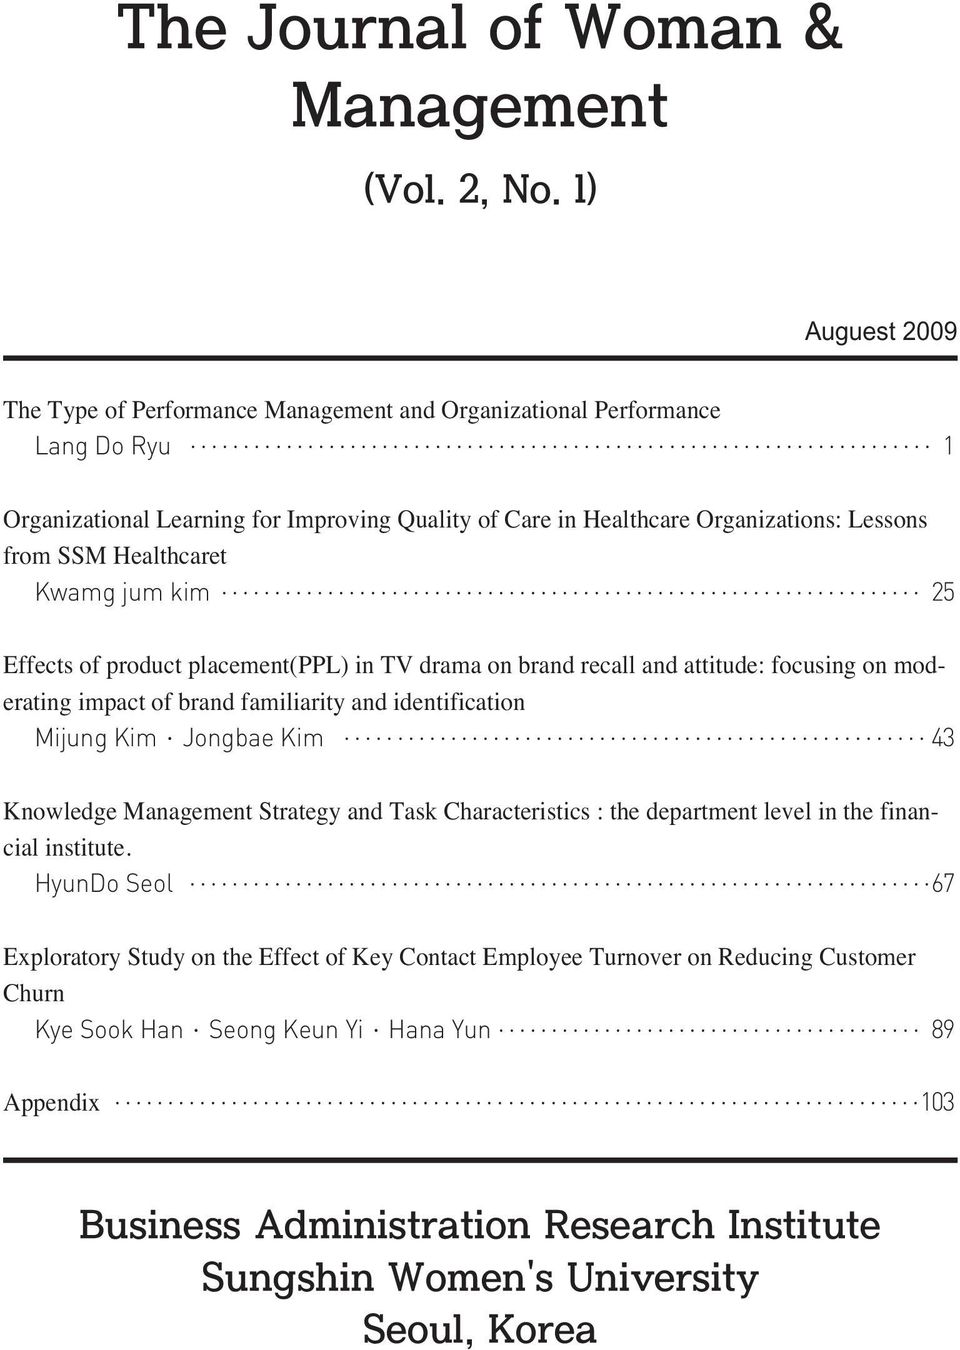 impact of brand familiarity and identification Mijung Kim Jongbae Kim 43 Knowledge Management Strategy and Task Characteristics : the department level in the